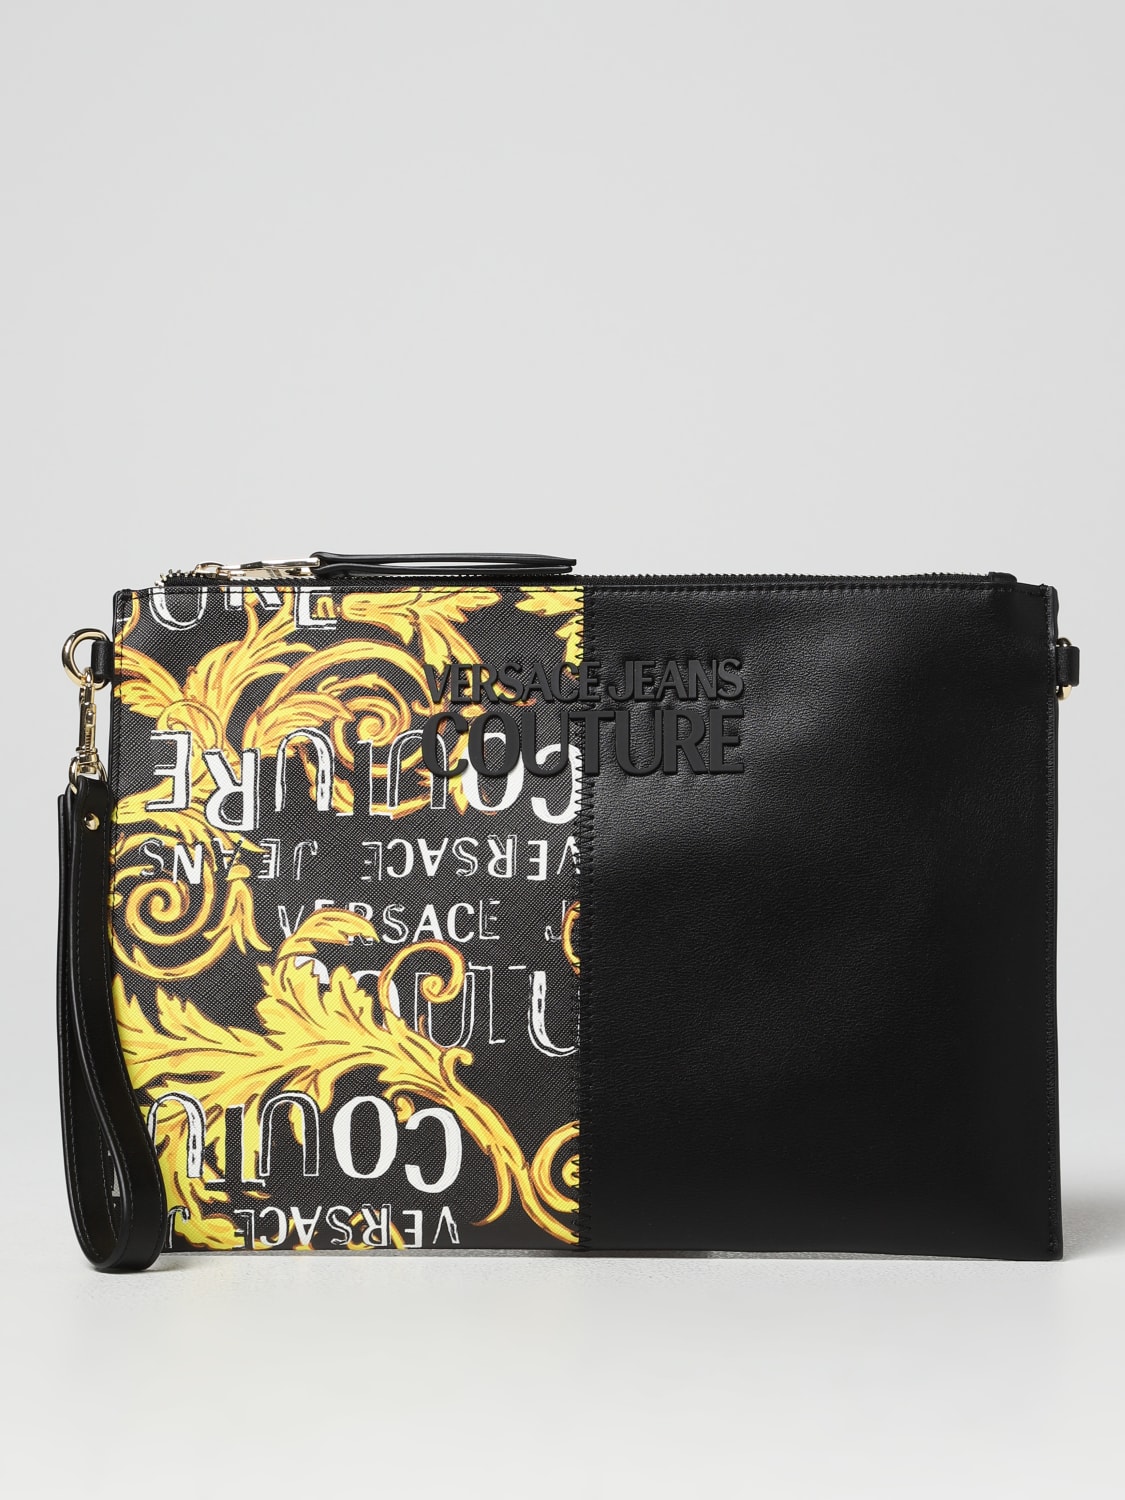 VERSACE JEANS COUTURE クラッチバッグ ブラック高さ20cm